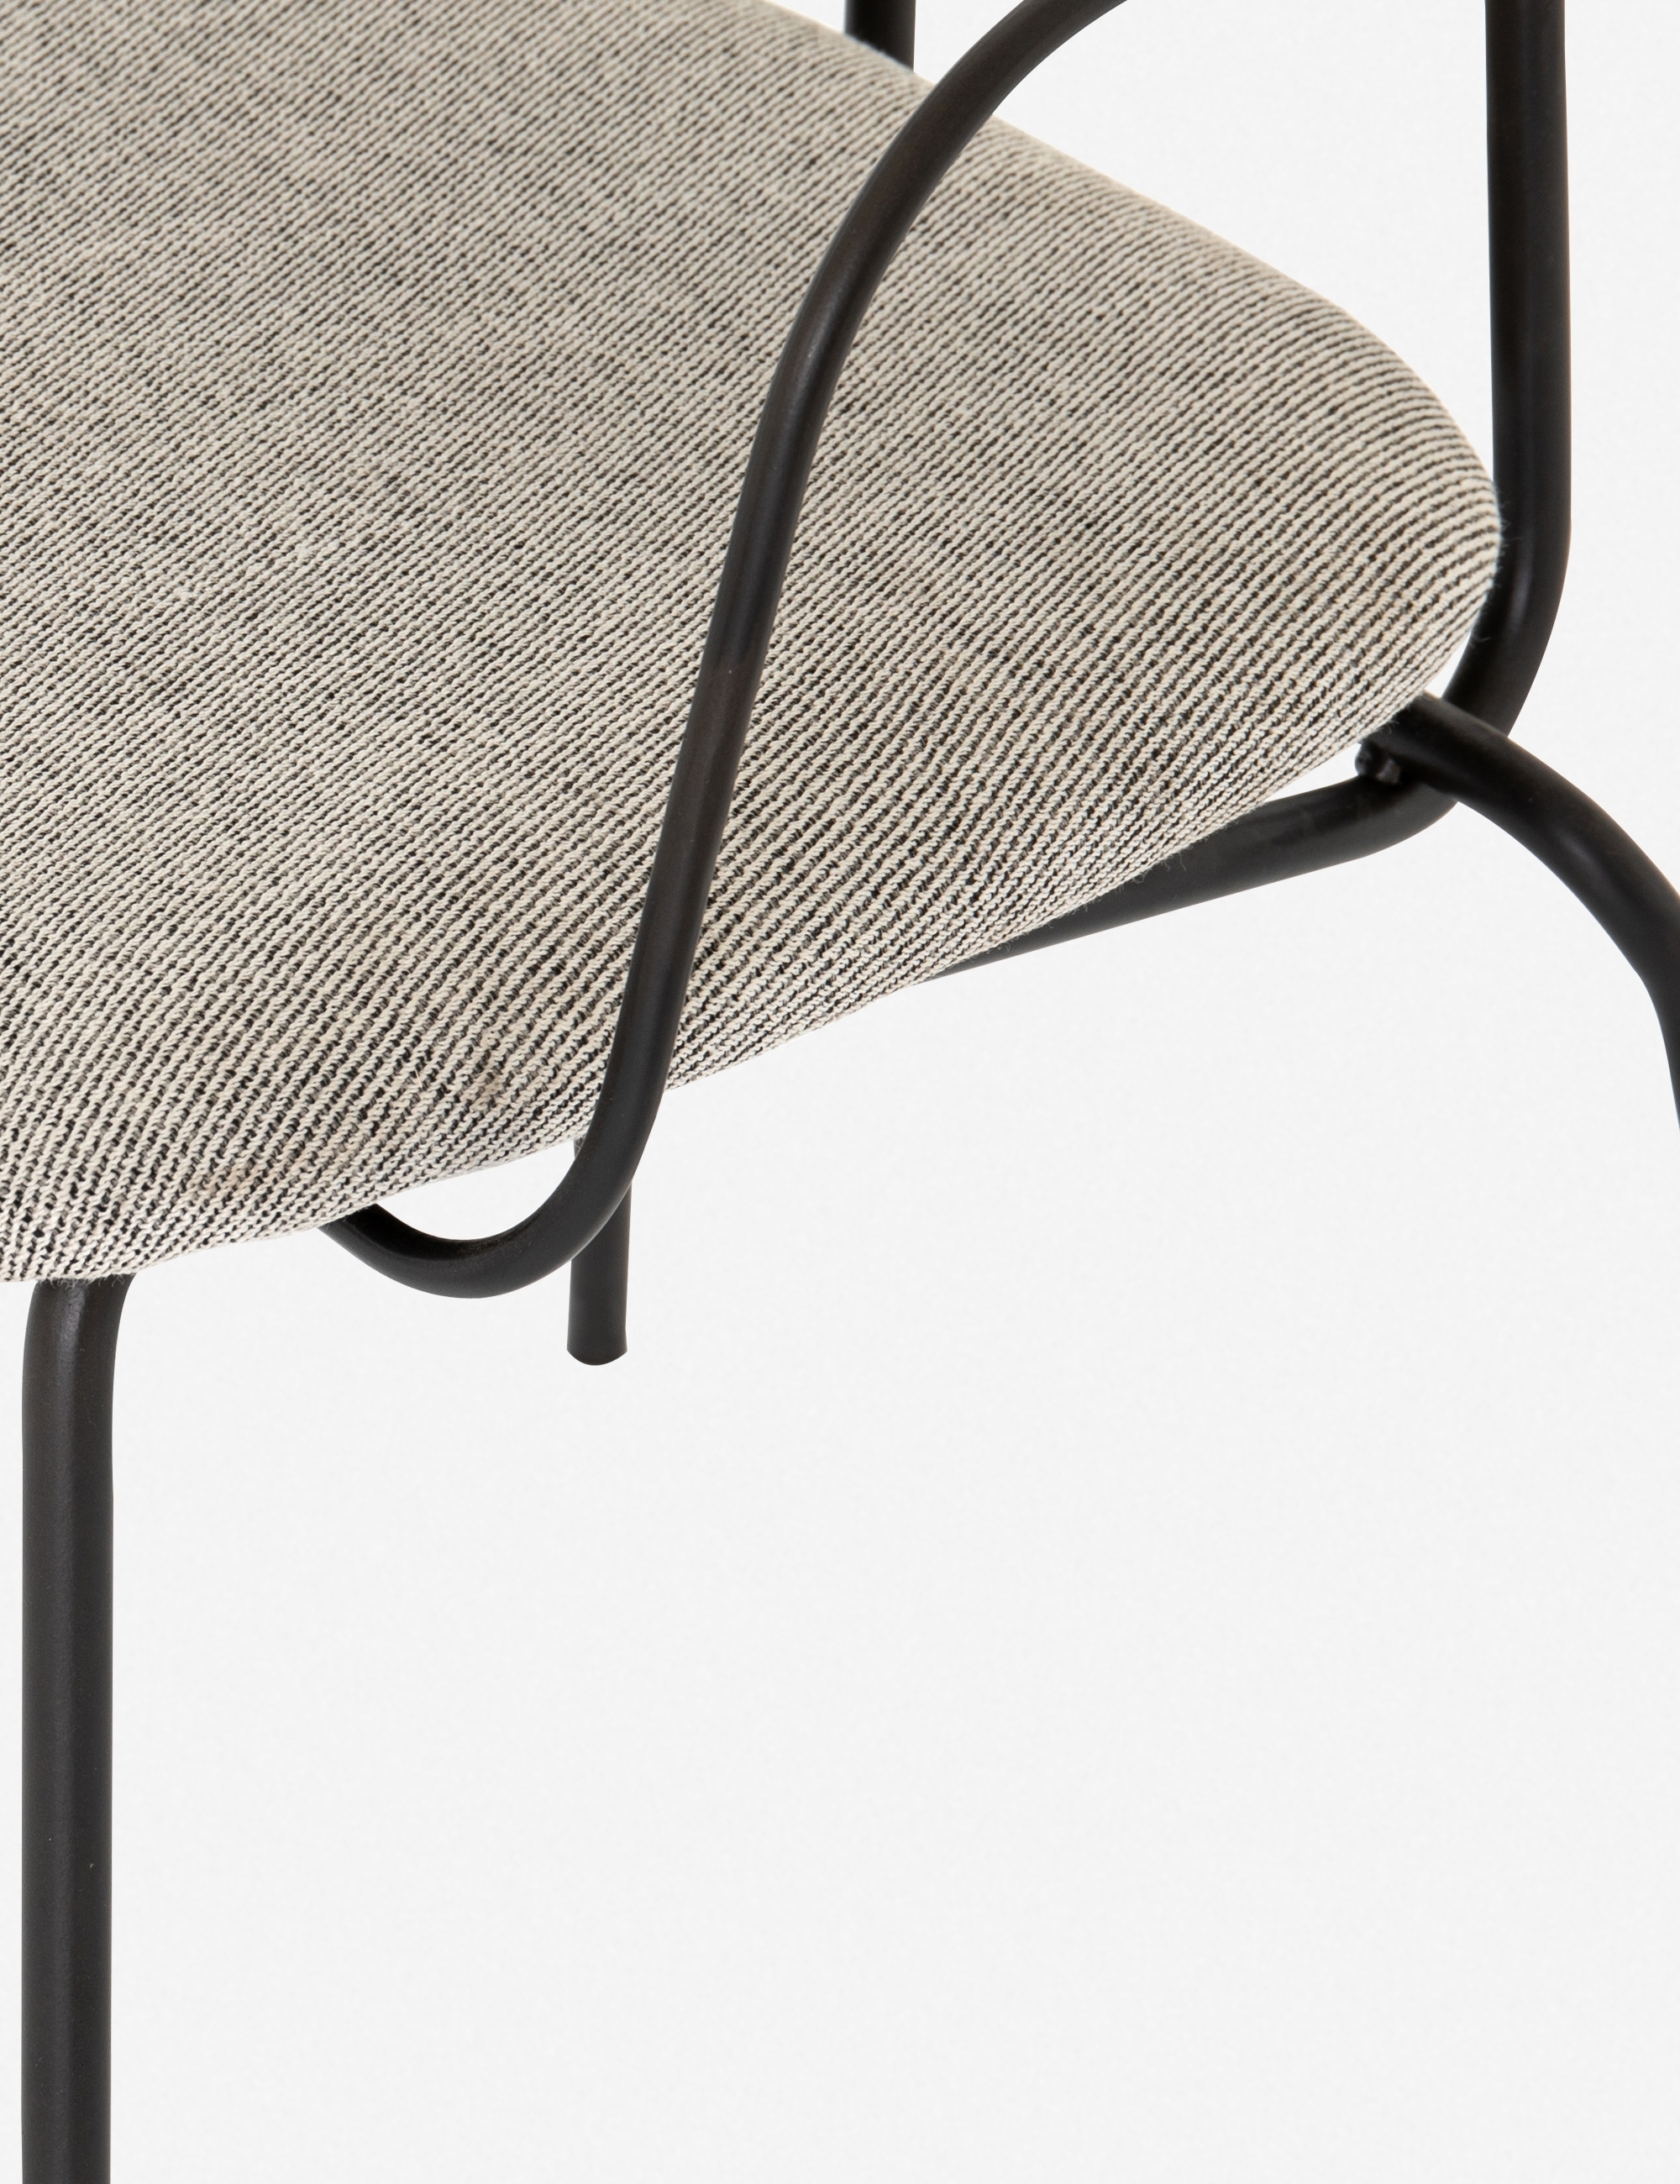 Harte Dining Chair - Image 8